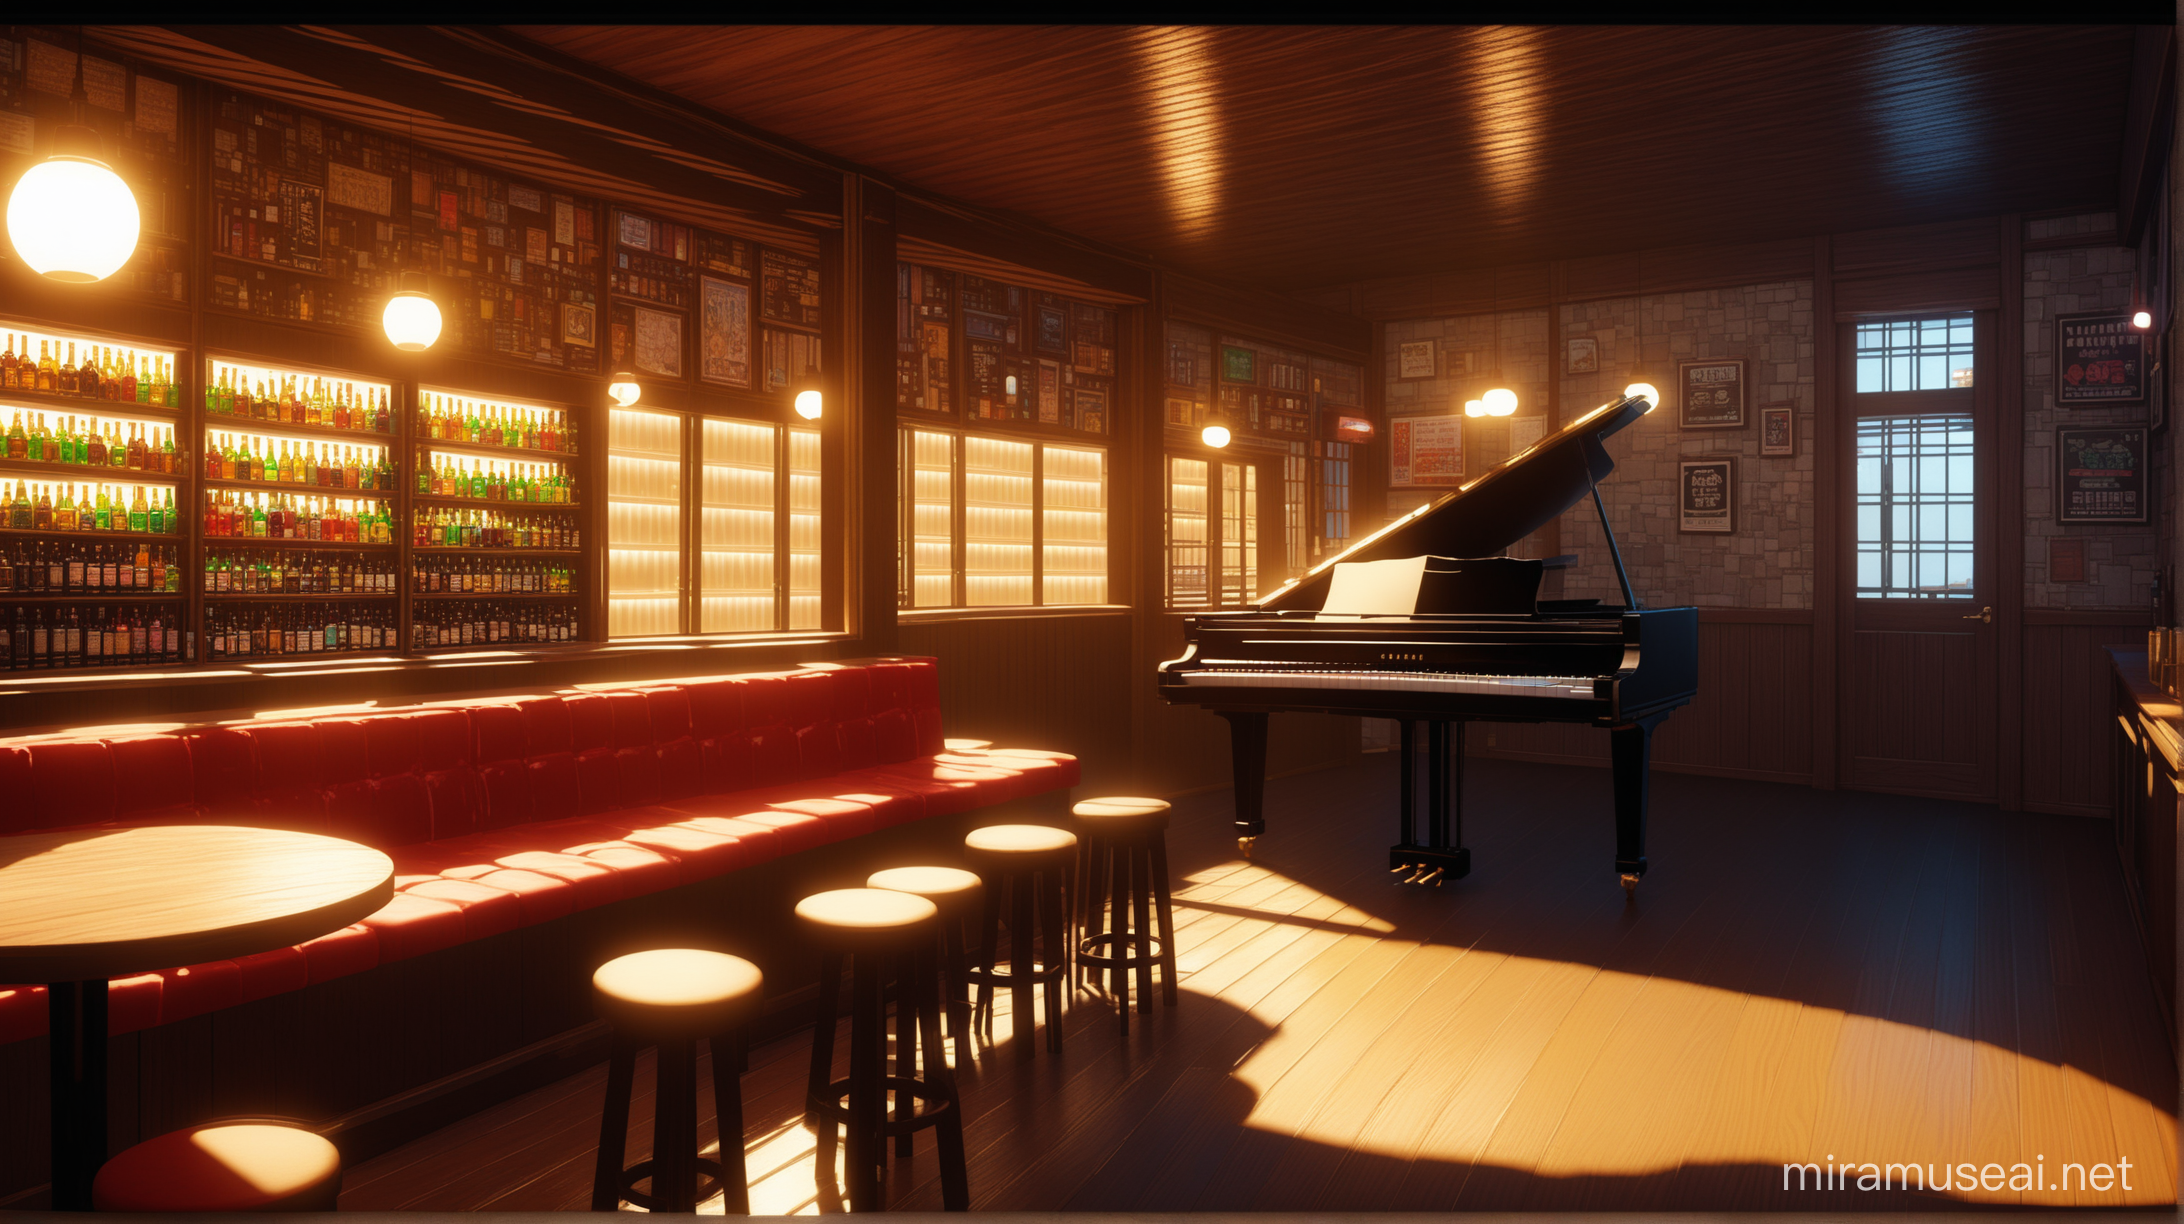 Elegant Japanese Jazz Bar Anime Painting with Piano and Cozy Atmosphere